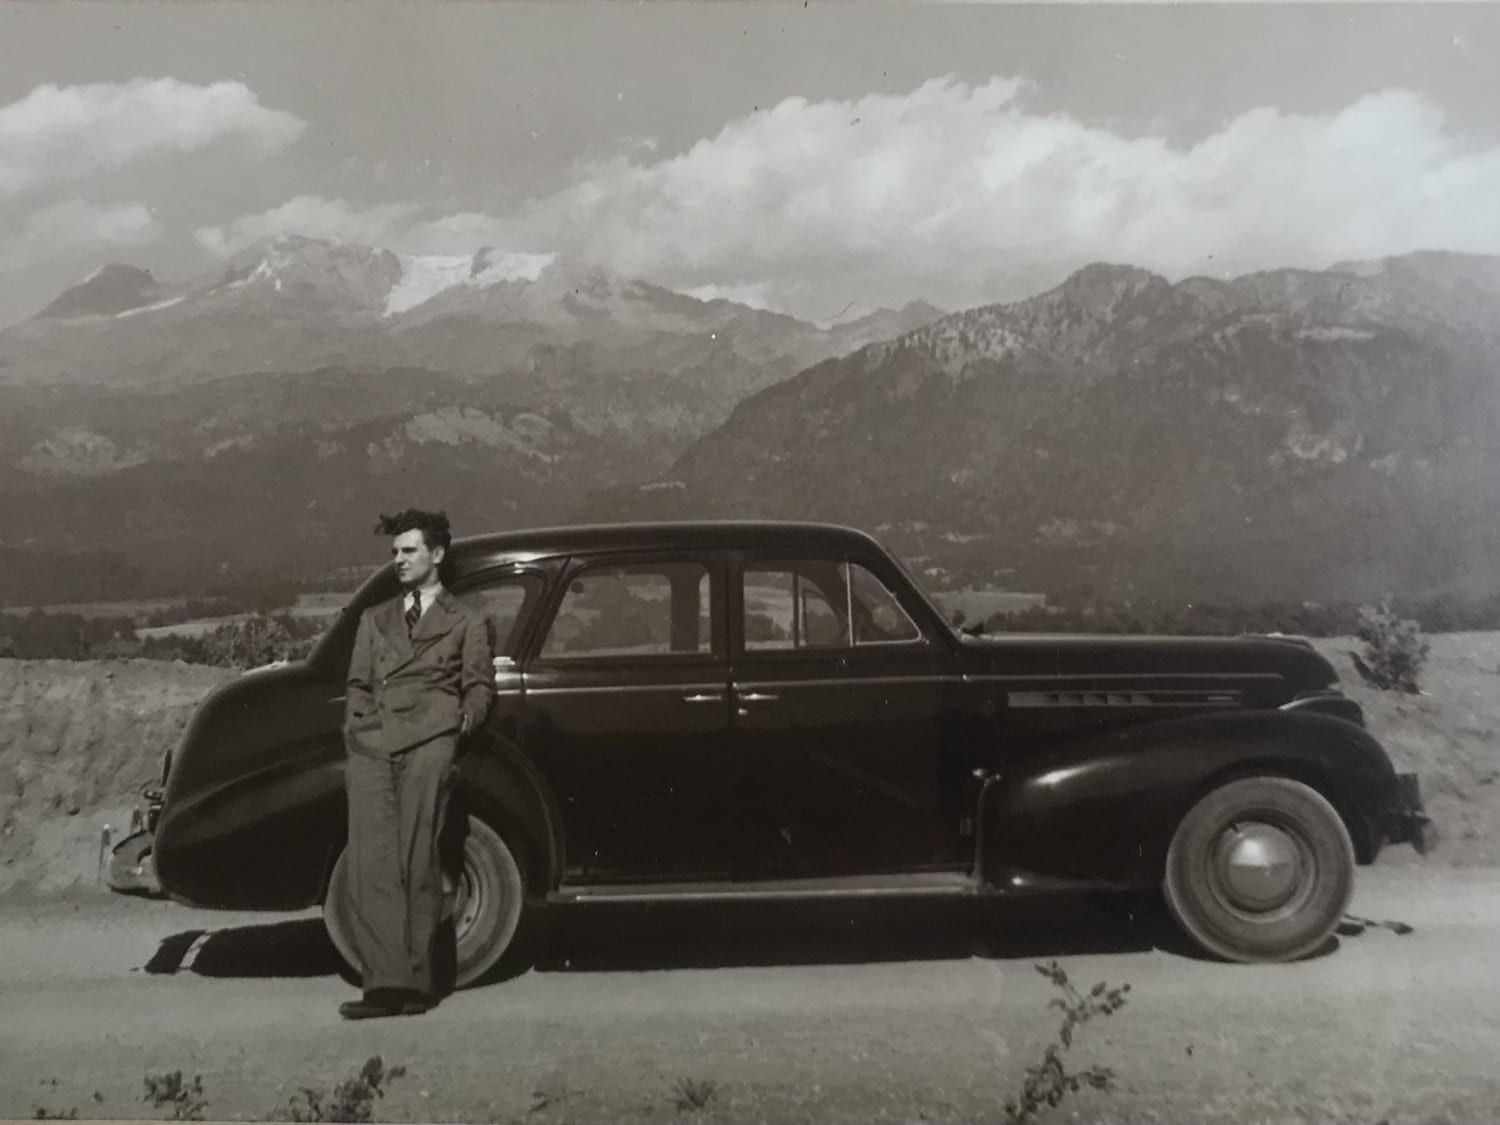 Grandpa Ray with his ‘39 Plymouth en route to Taxco, Oaxaca all the way from St. Paul, Minnesota in 1941. Photo taken outside Mexico City; Mt Iztaccihuatl in the background.